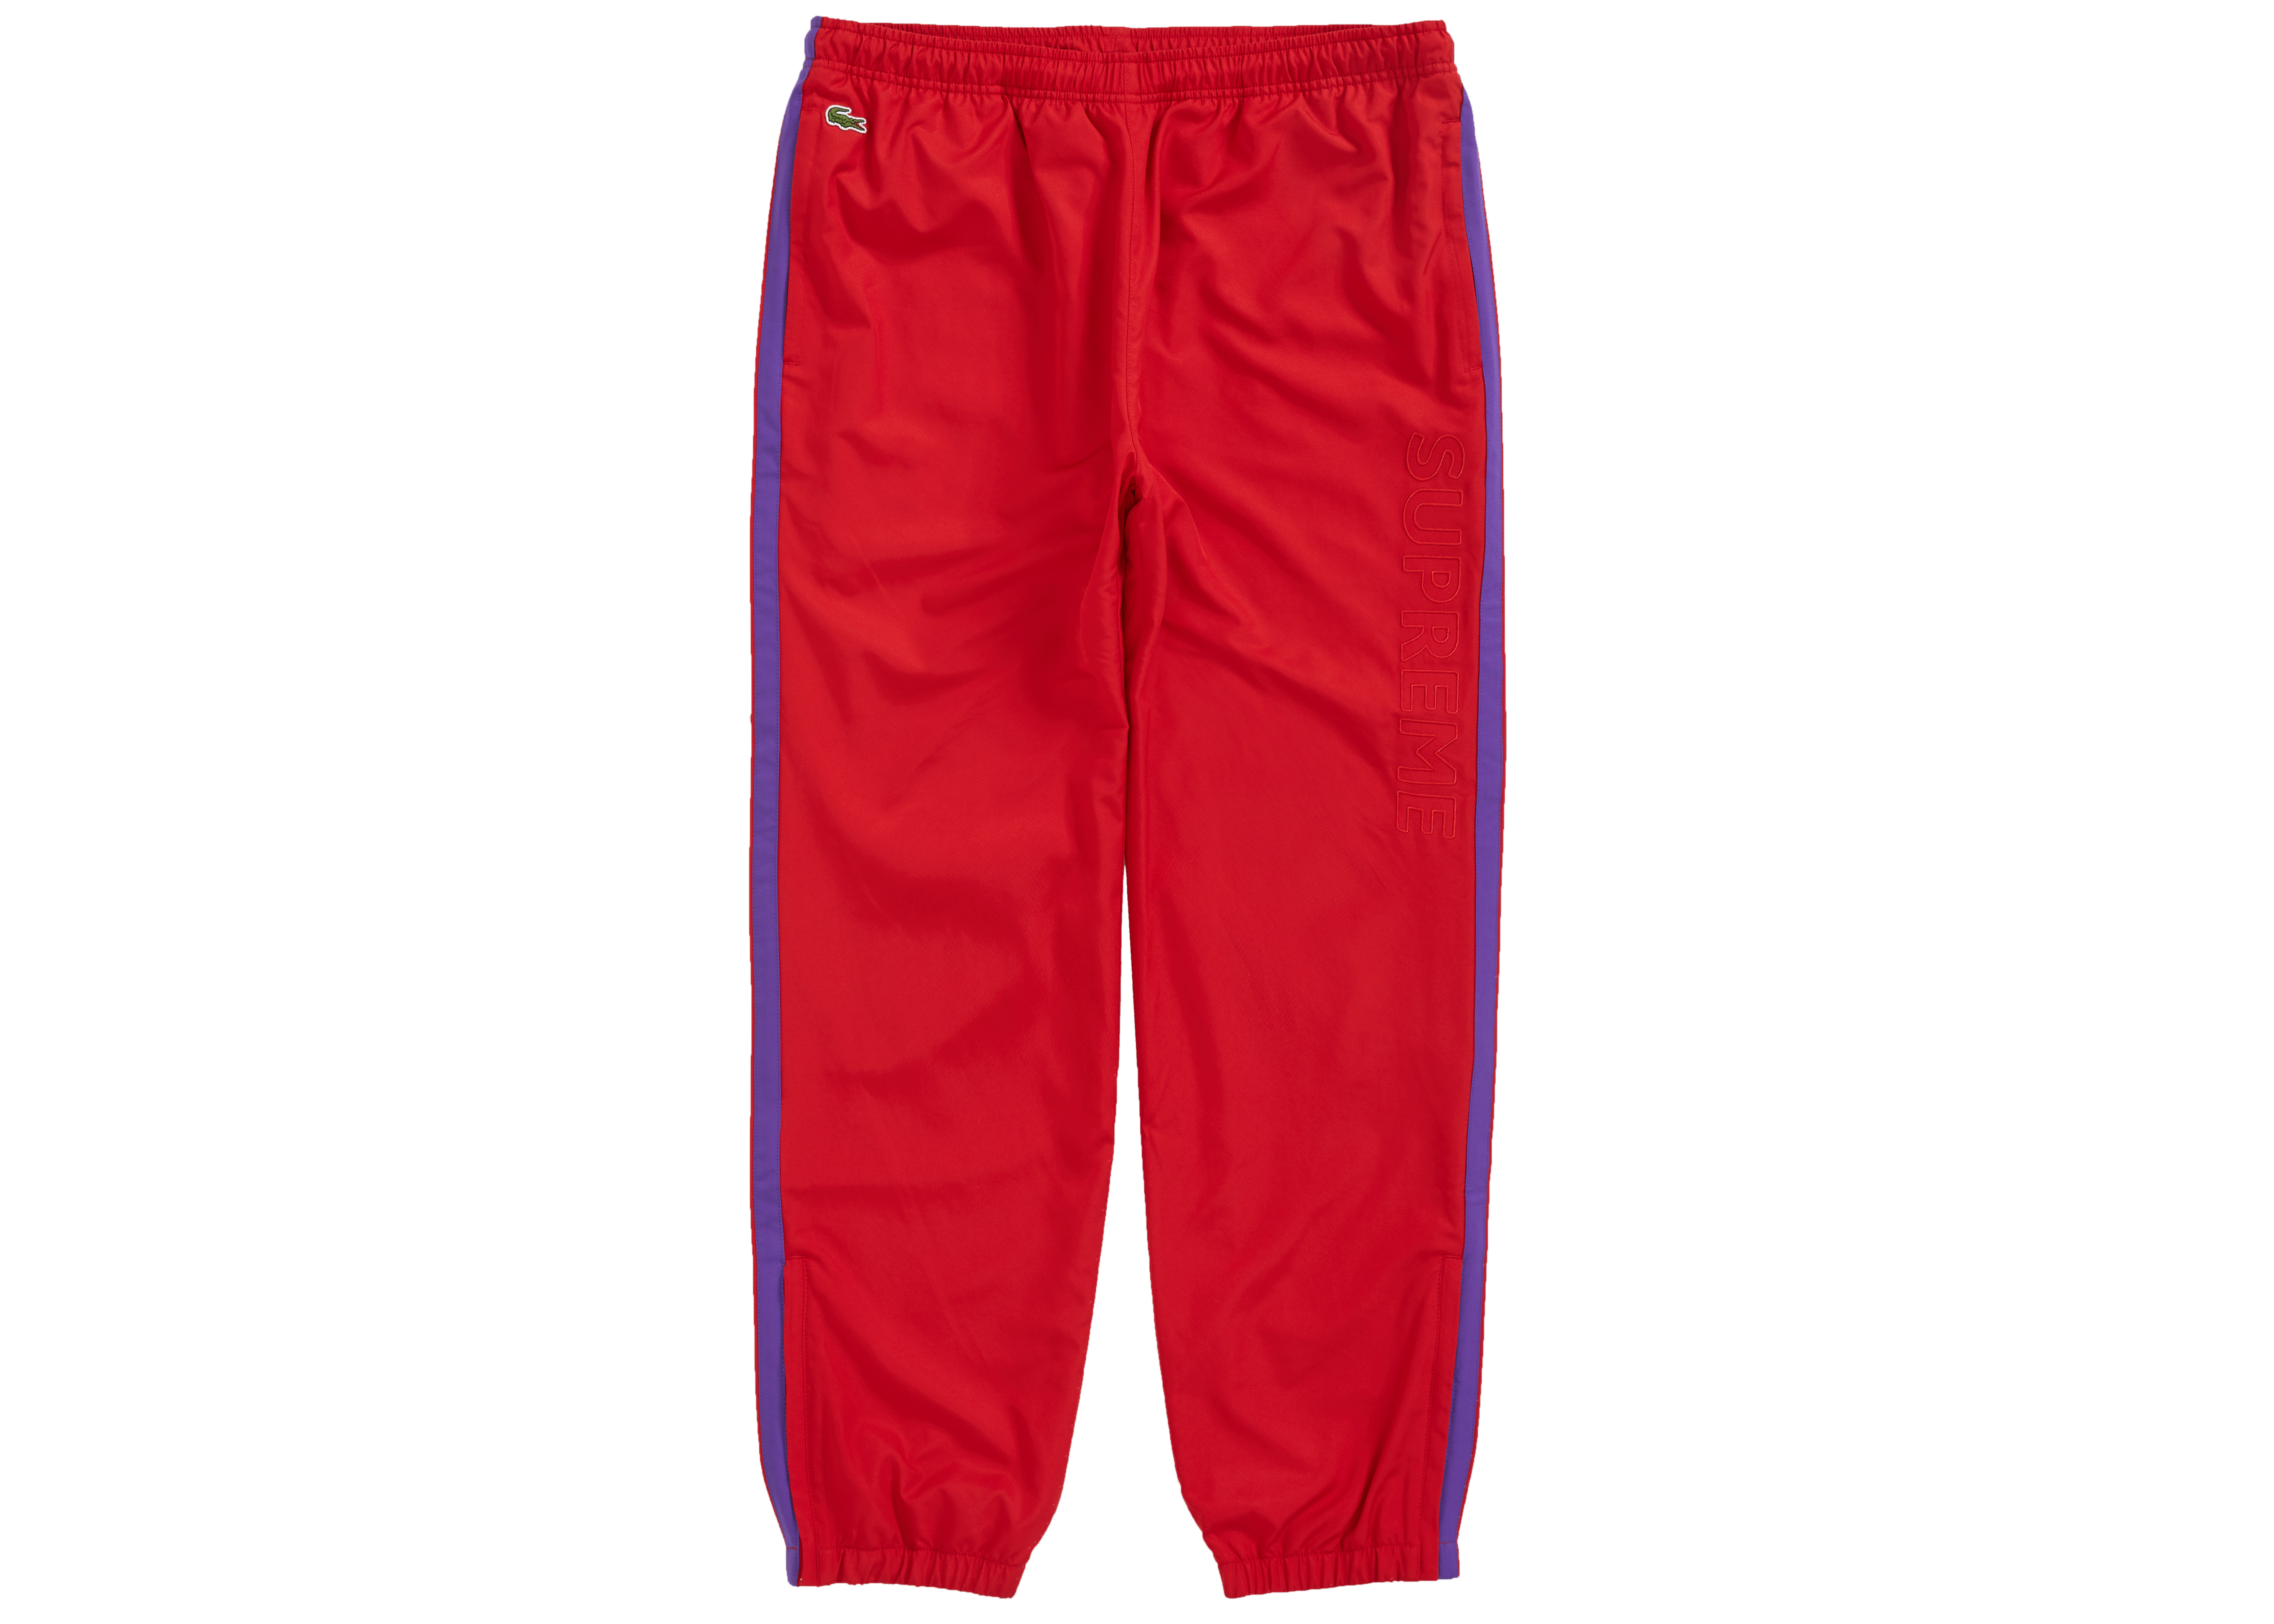 Supreme LACOSTE Track Pant (FW19) Red Men's - FW19 - GB